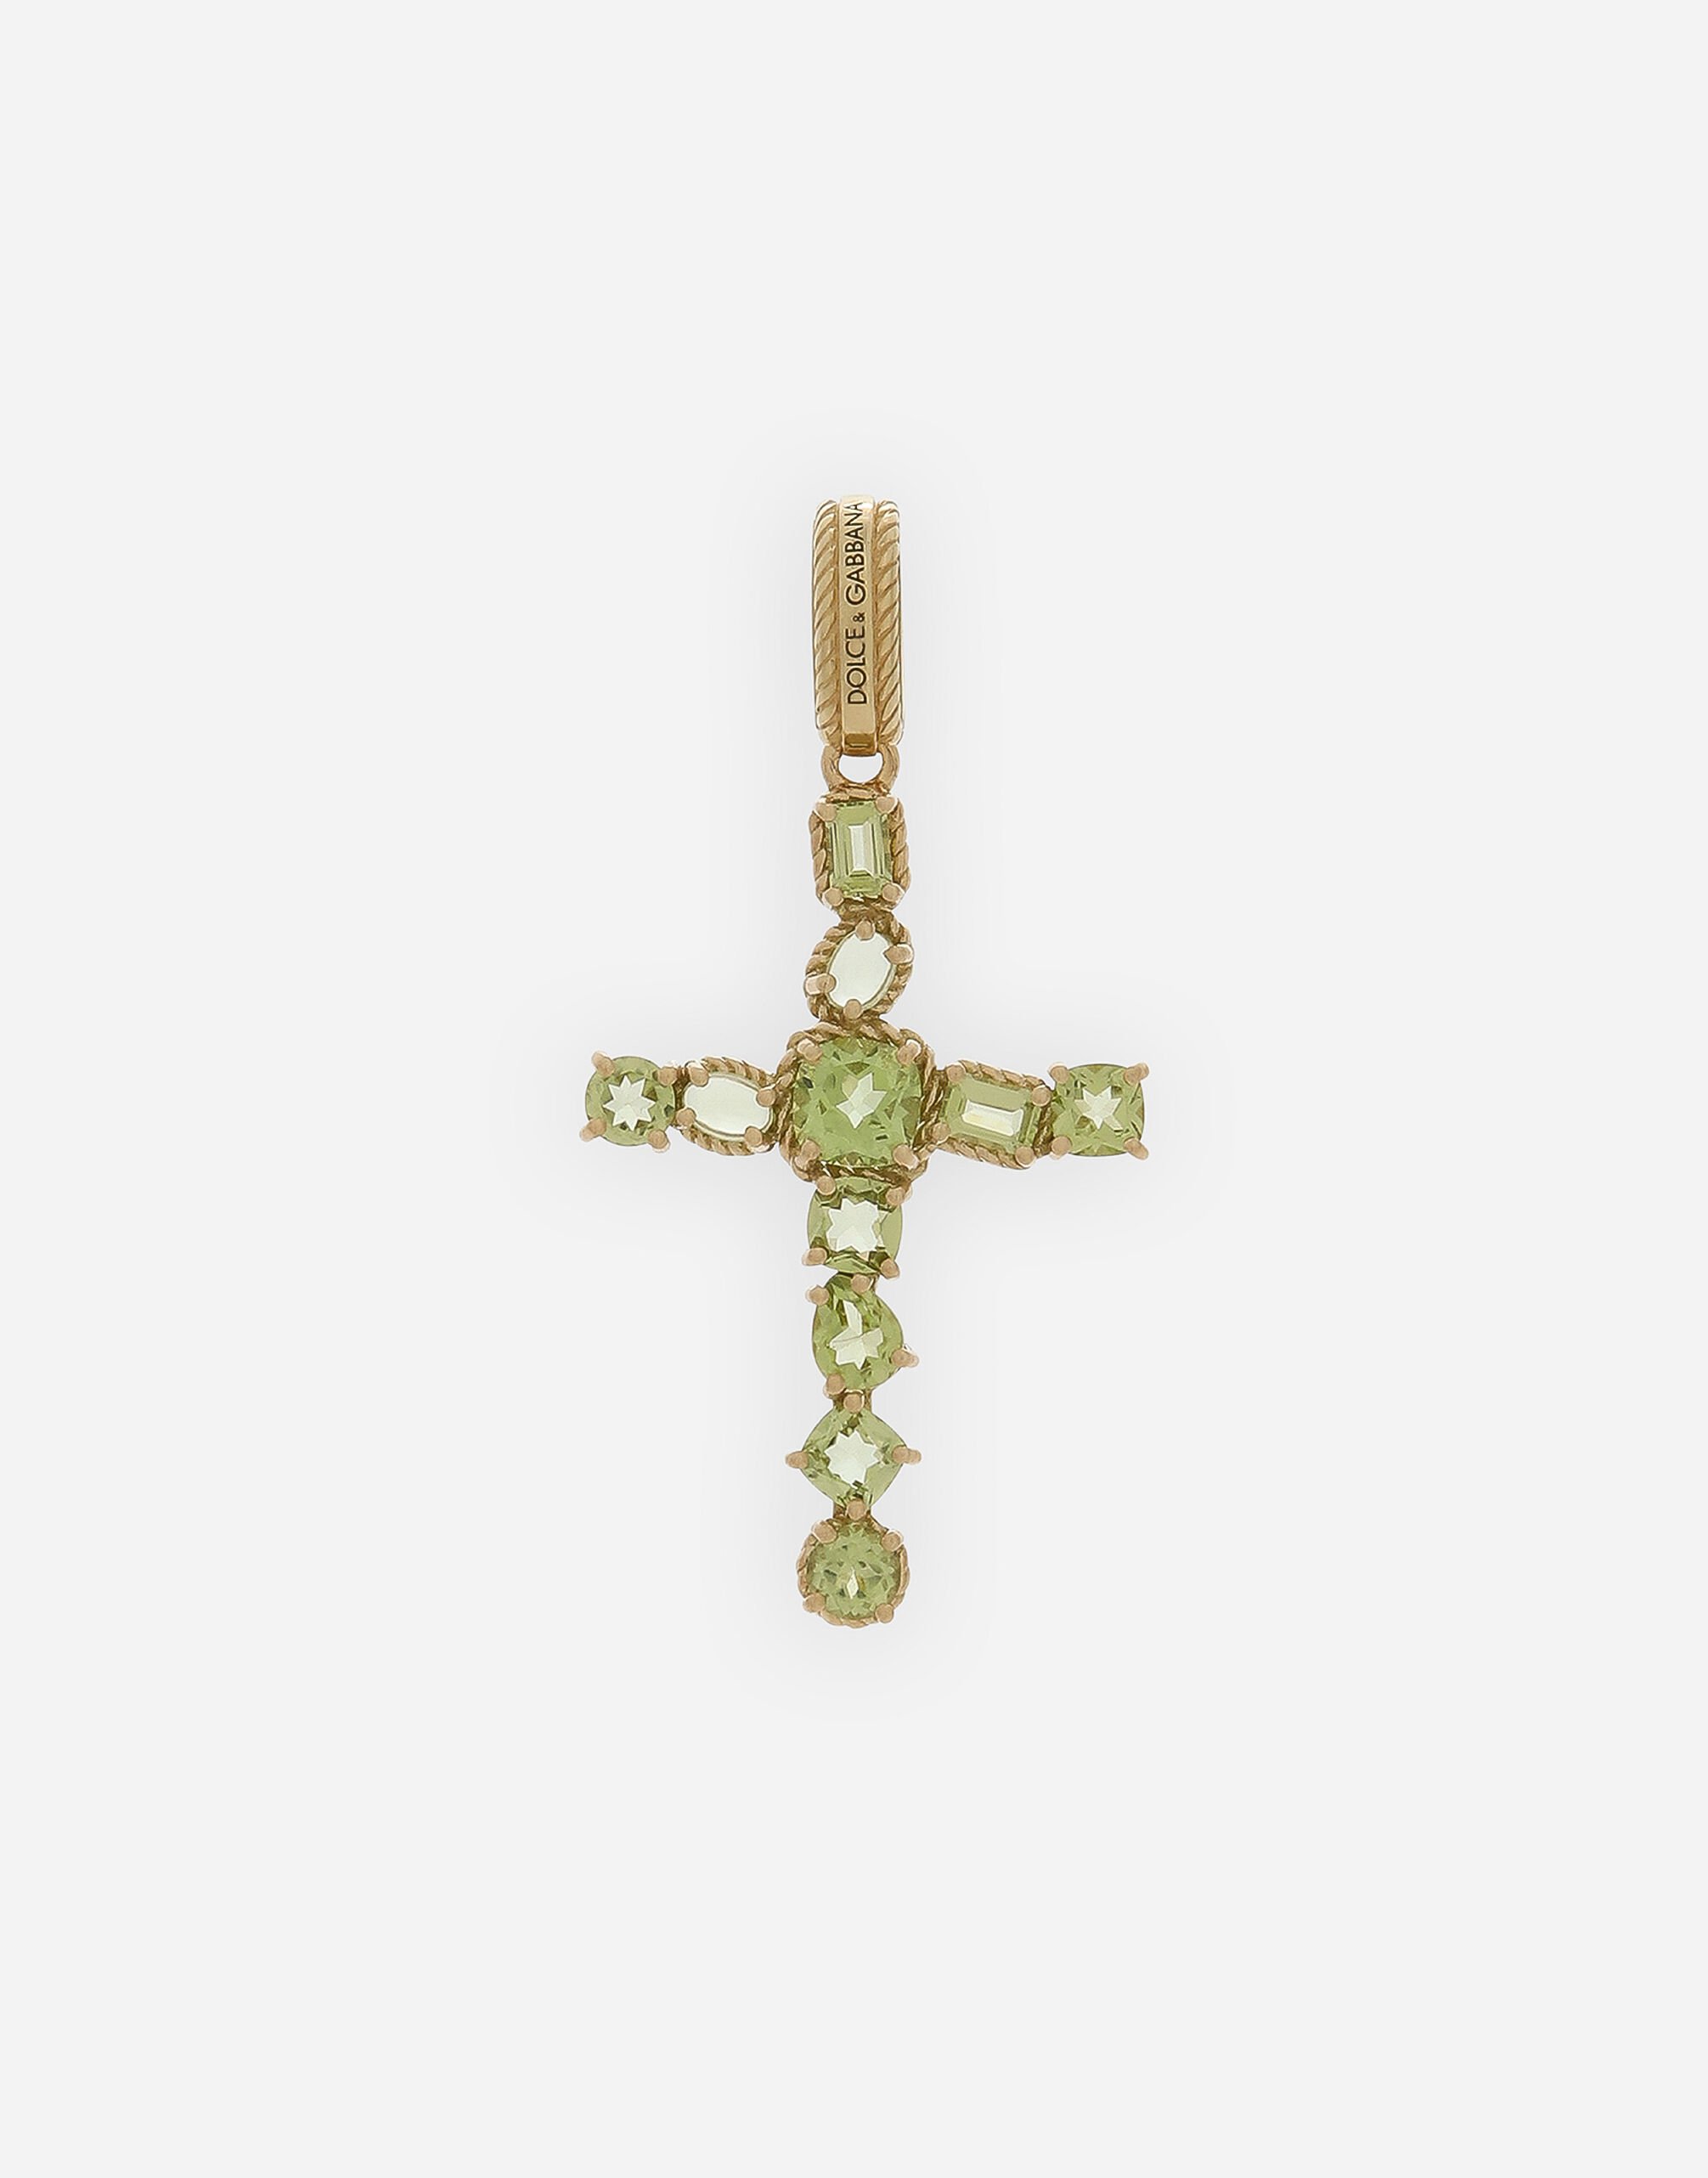 Dolce & Gabbana Anna Charm in yellow gold 18Kt and peridots Gold WANR1GWMIXA